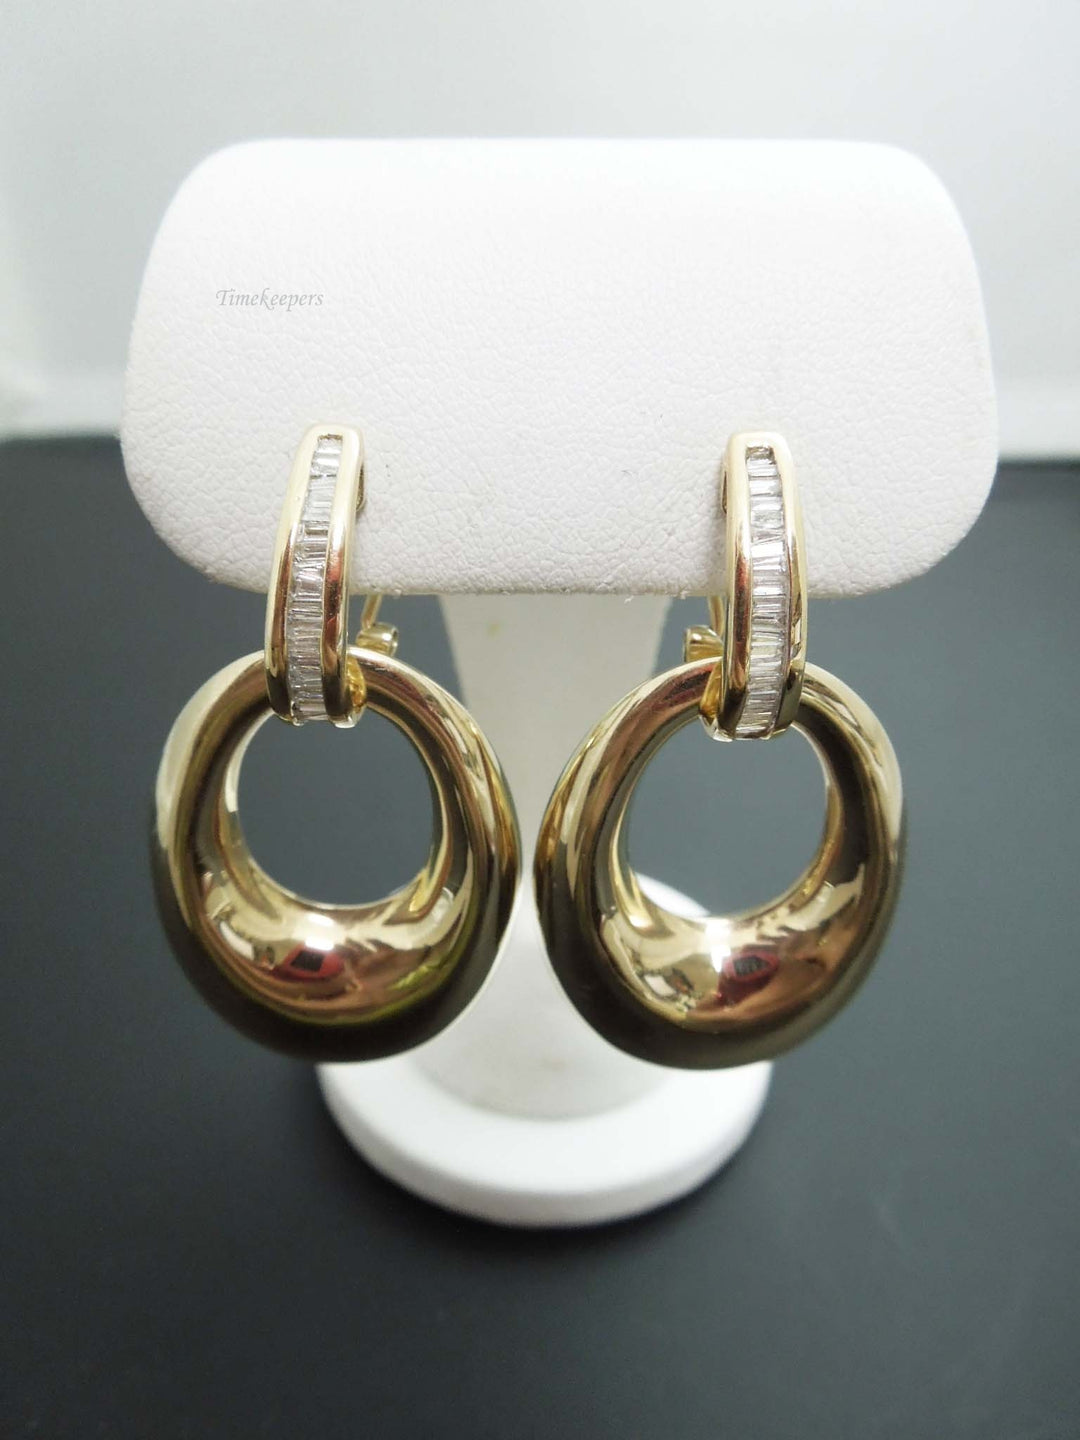 a836 Vintage Gorgeous Baguette Diamond Half Hoop Post Earrings 14k Yellow Gold With Jackets